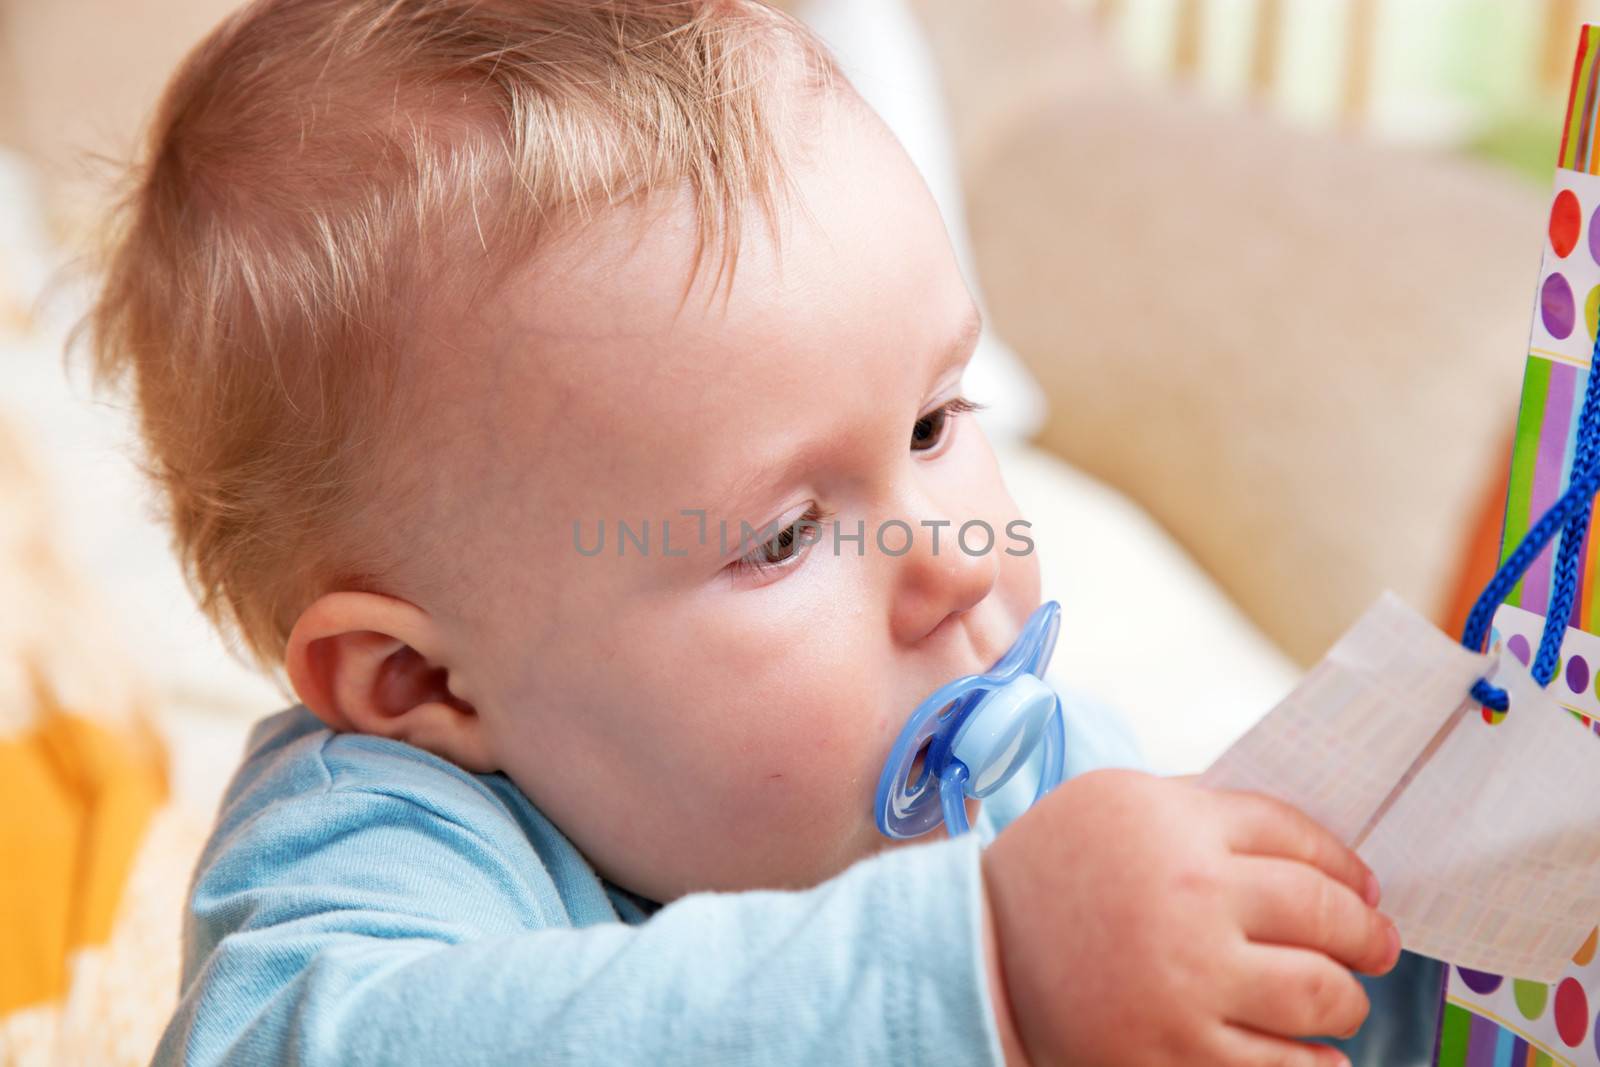 Young baby boy with a dummy in his mouth playing with colorful papers